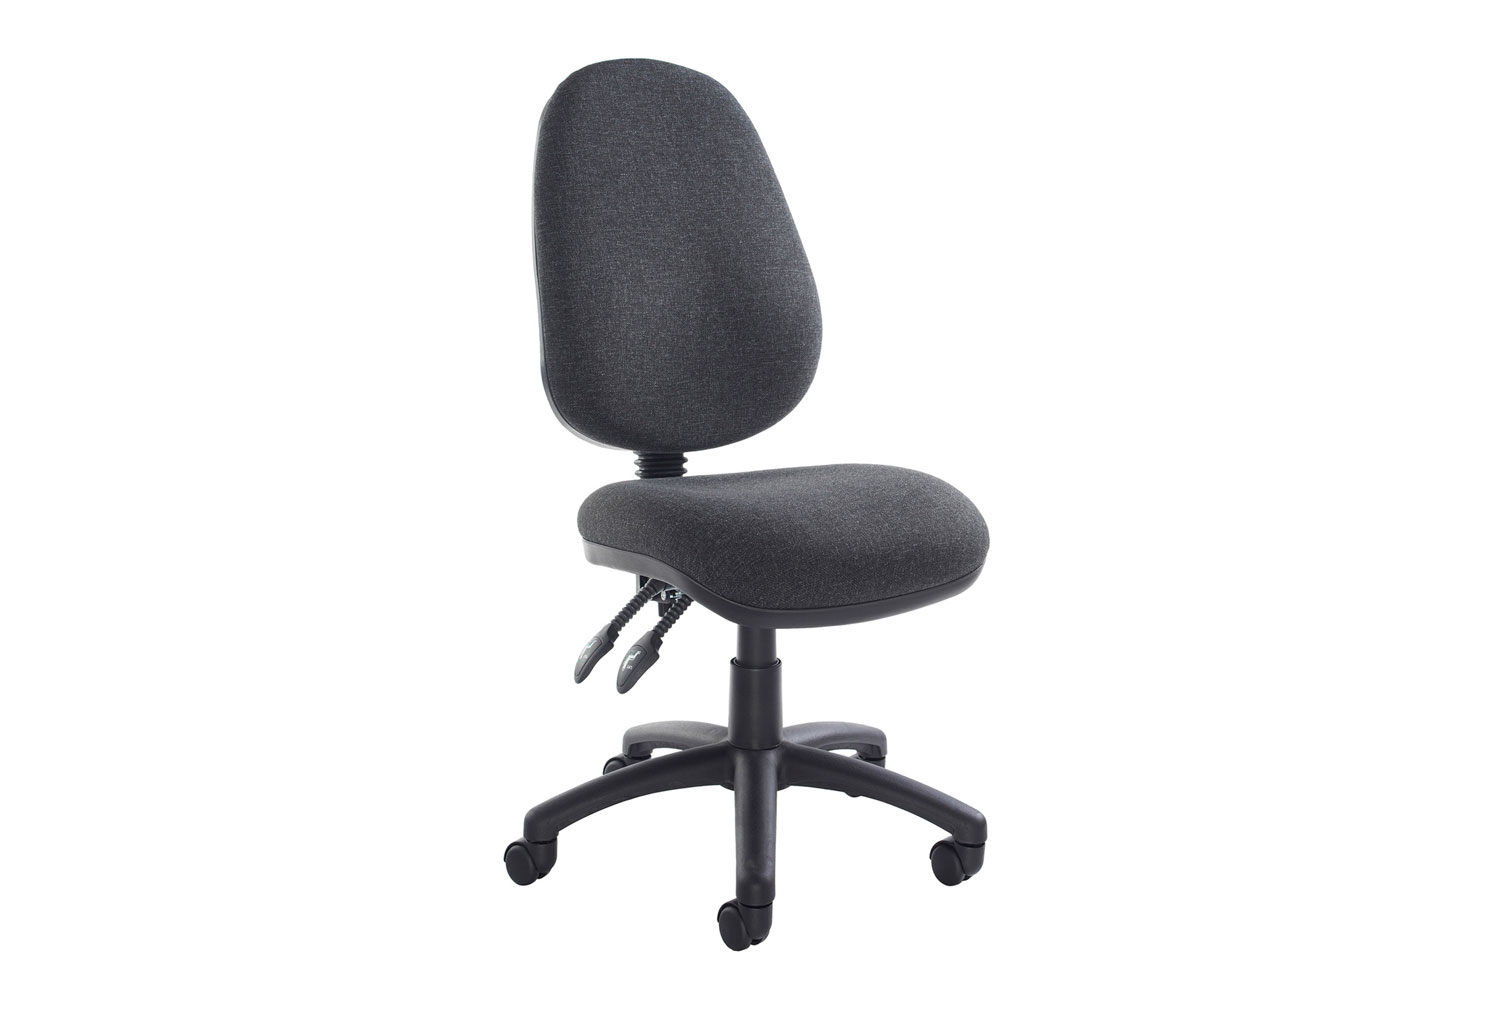 Kendall 2 Lever High Back Operator Office Chair, Without Arms, Charcoal, Fully Installed